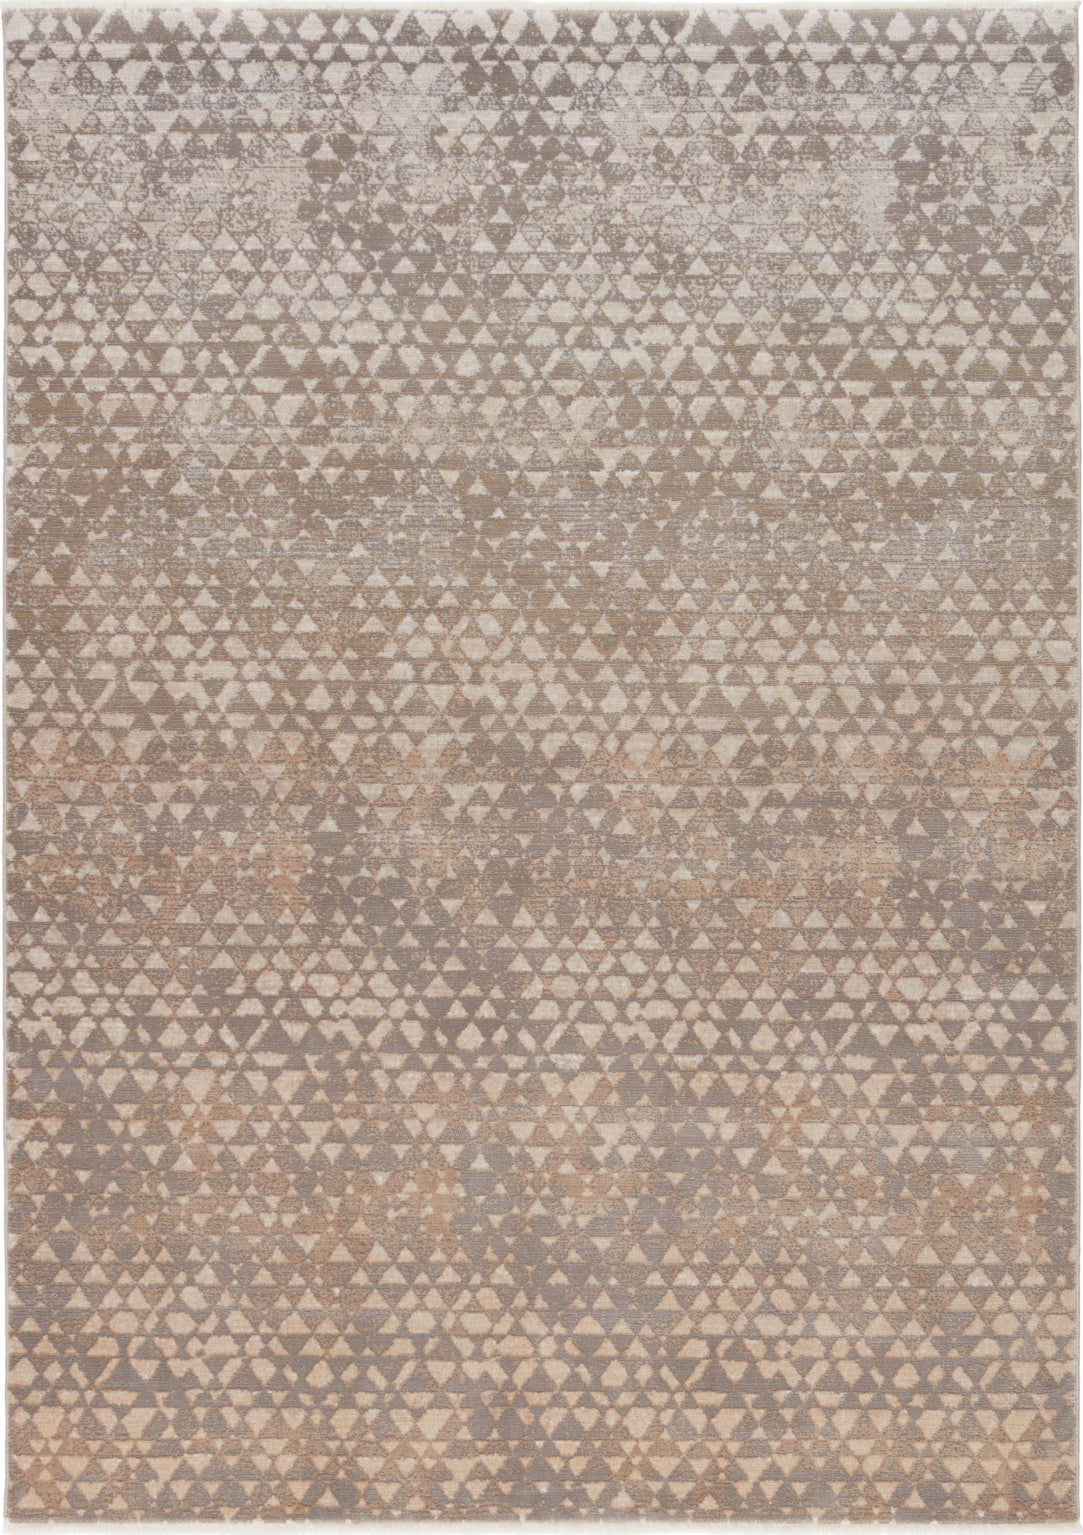 Jaipur Living Land Sea Sky Sierra Taupe/Gray Area Rug by Kevin O'Brien - Top Down